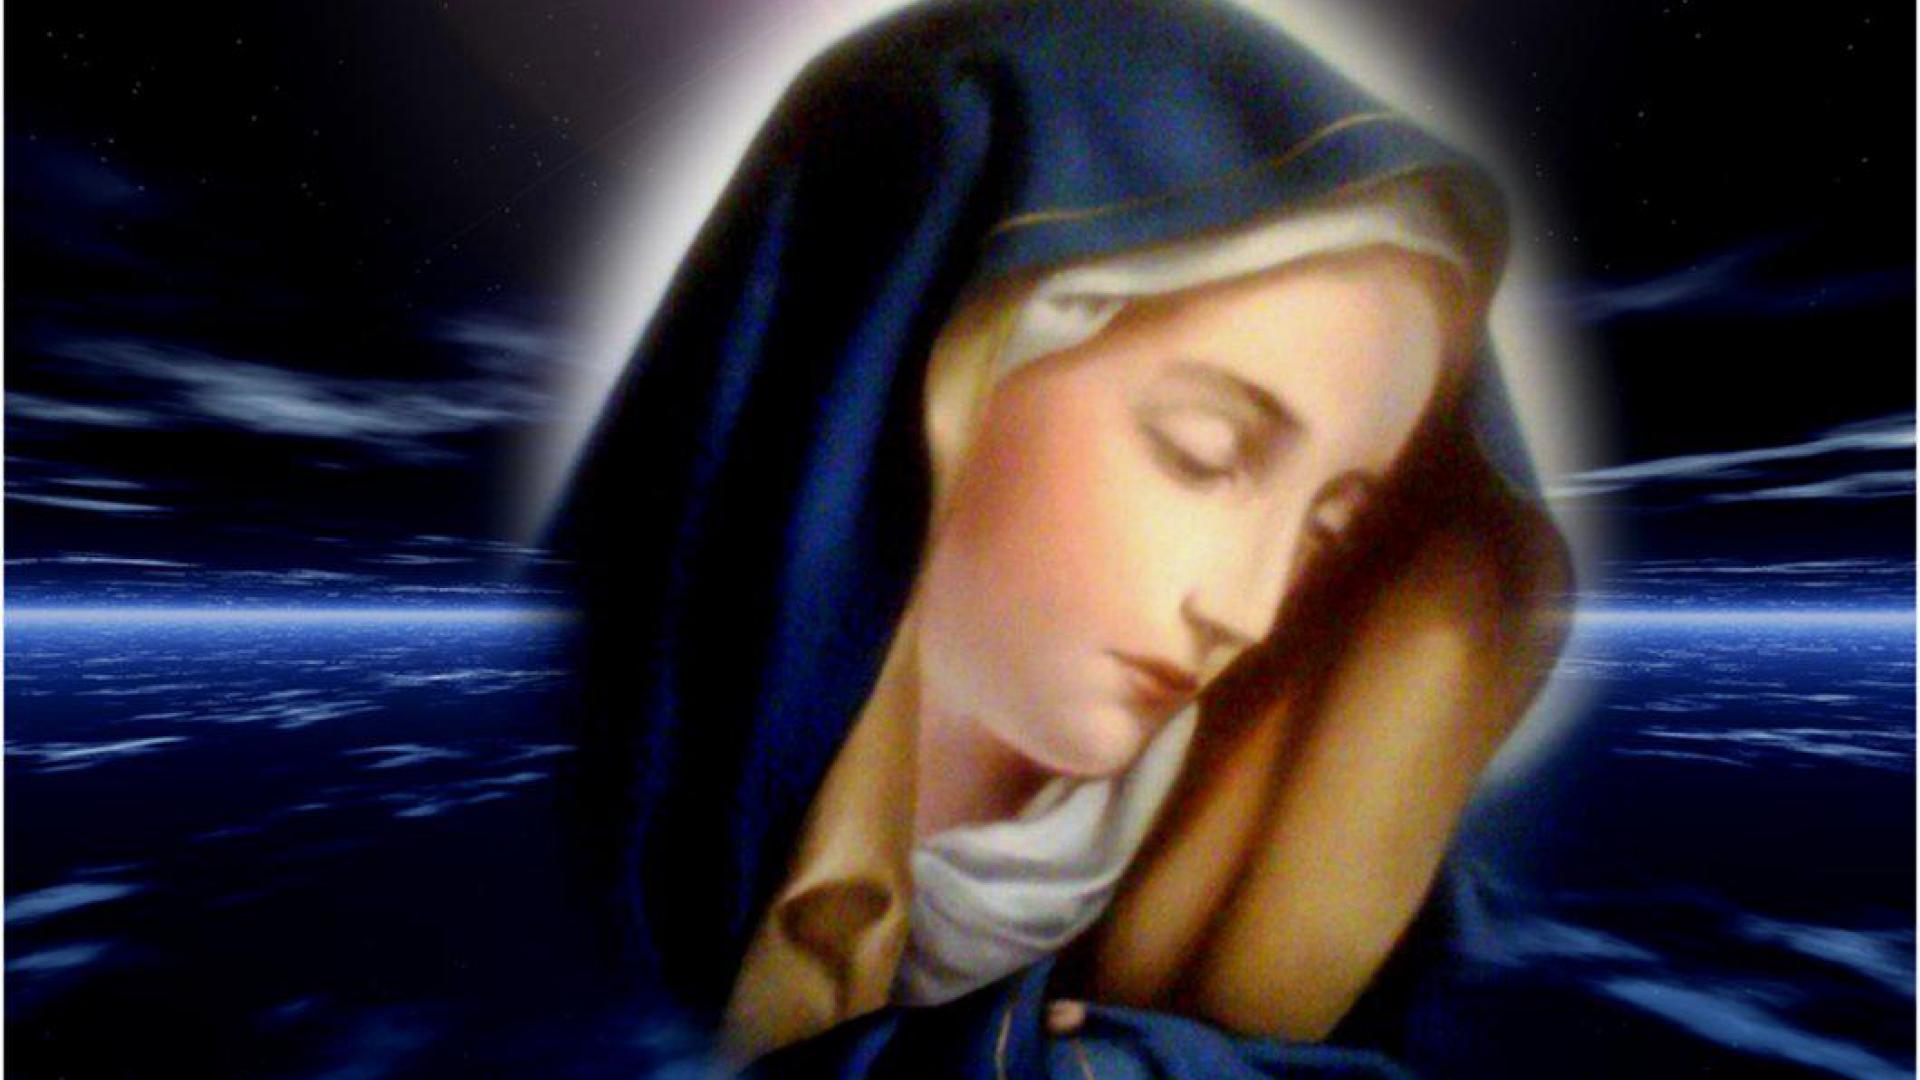 mother mary wallpaper gallery,beauty,sky,space,cg artwork,photography